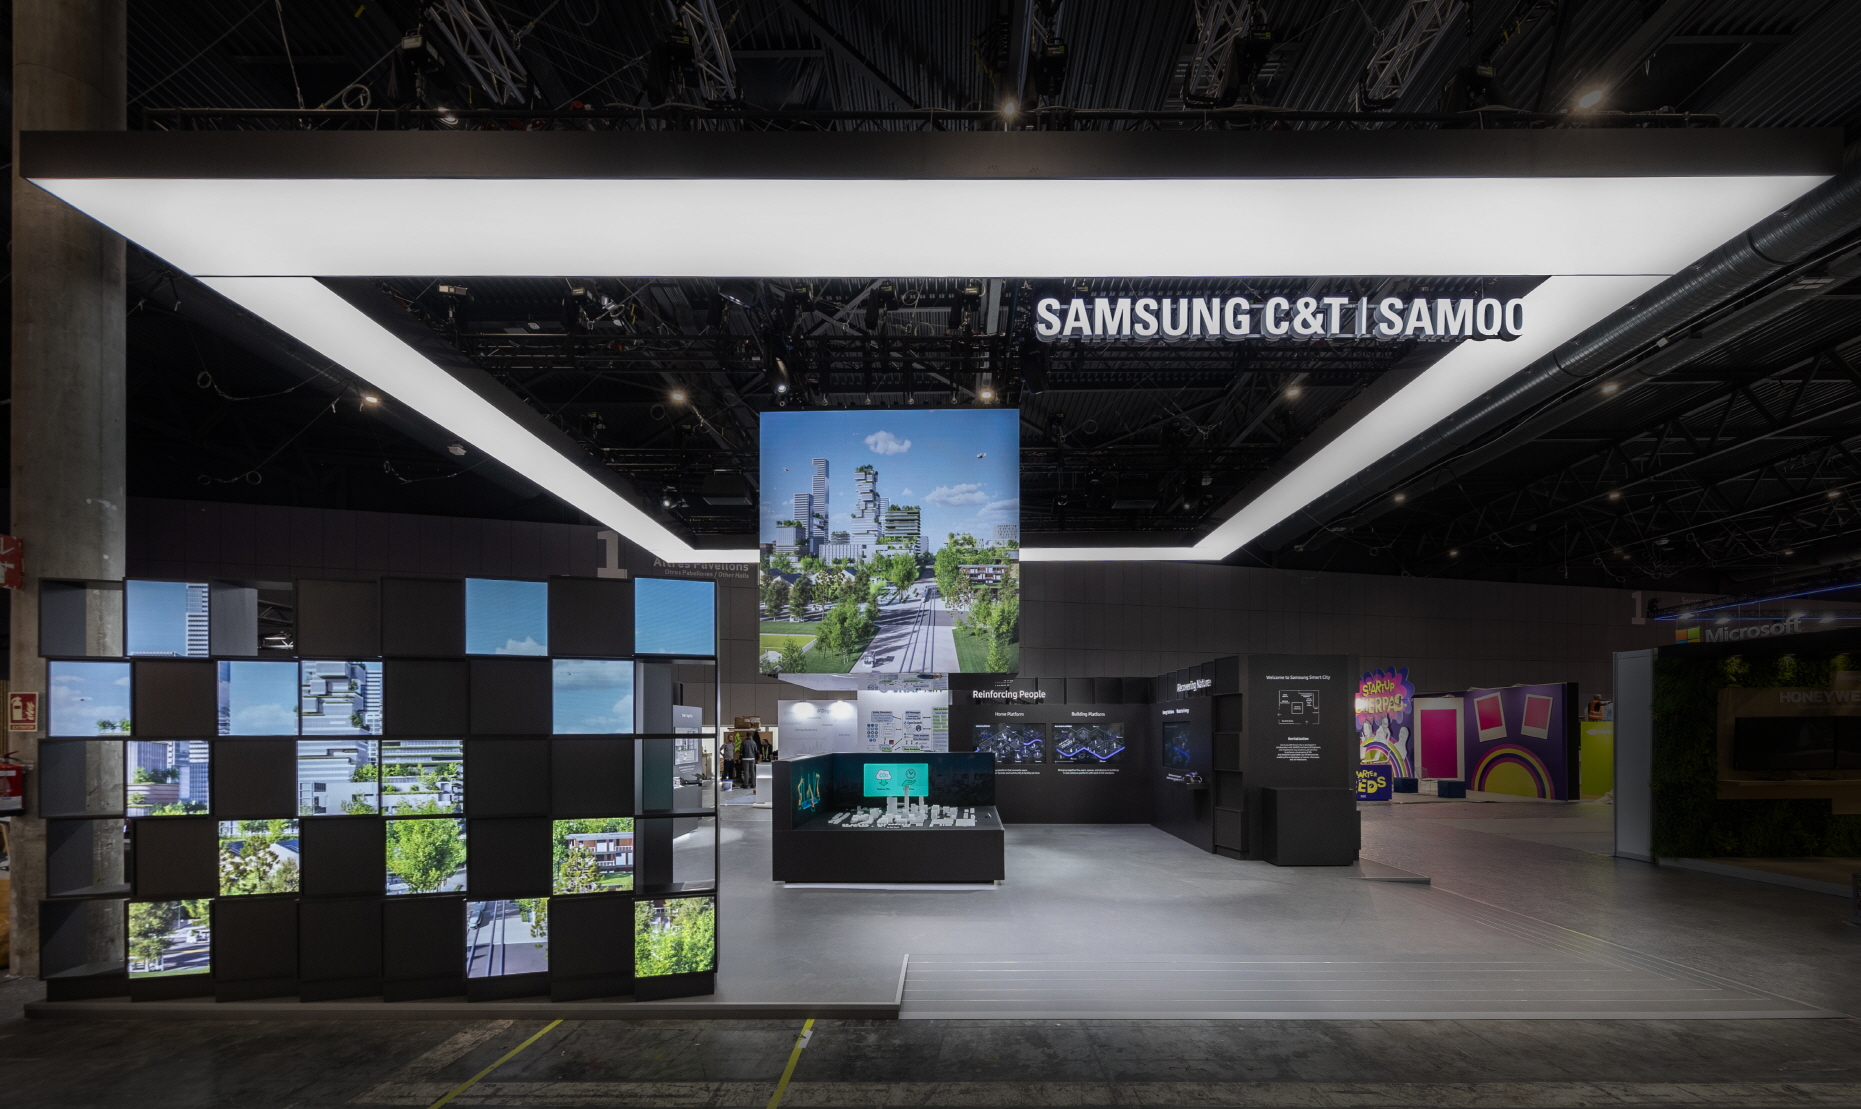 Samsung C&T’s exhibition booth at the 2023 Smart City Expo World Congress